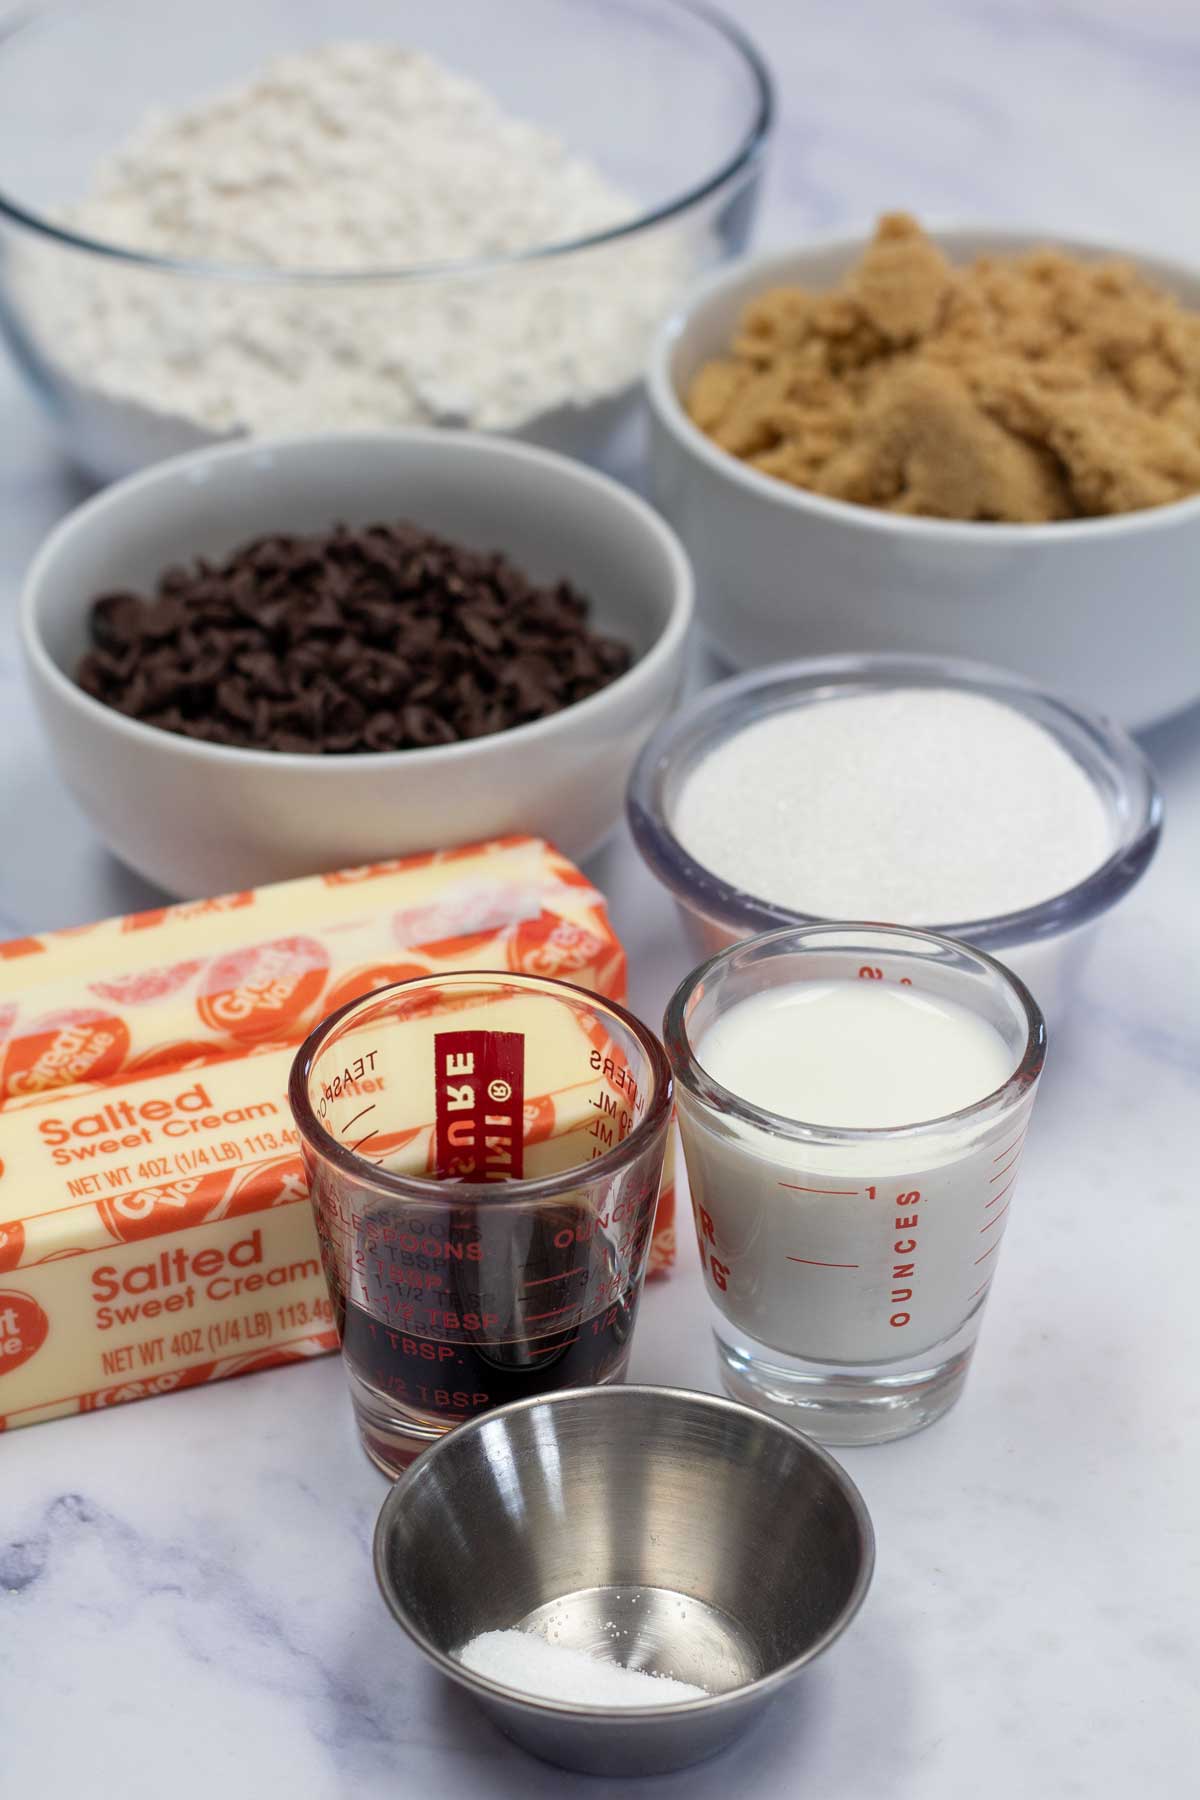 Tall image showing edible cookie dough ingredients.